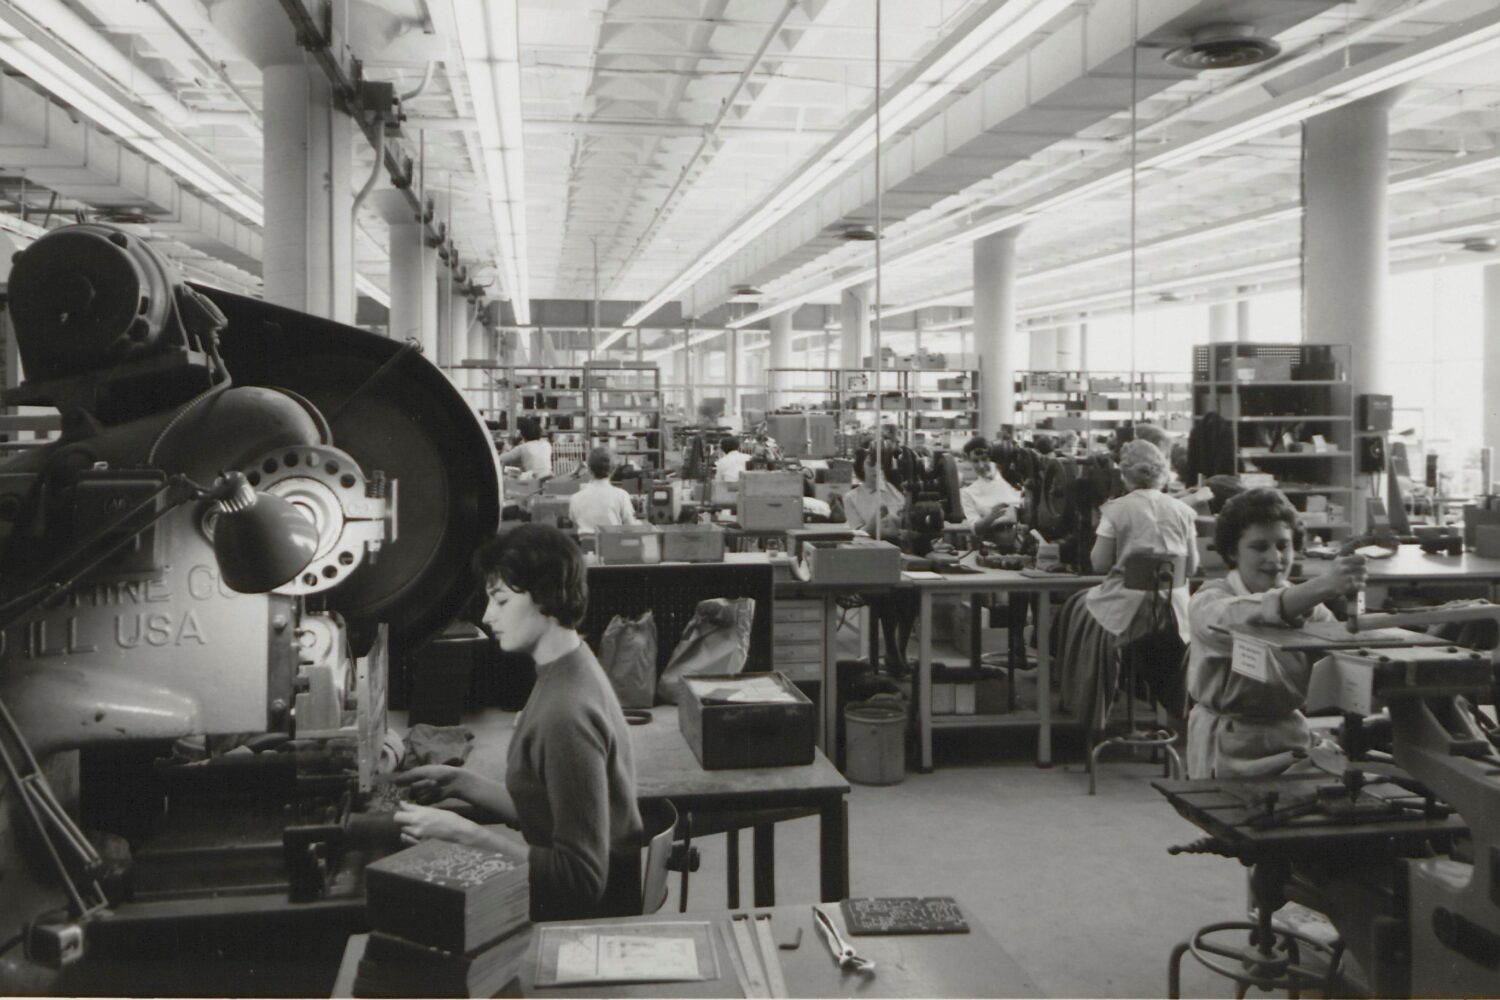 Female employees working at the Palo Alto production facility in the 1950s or 1960s.